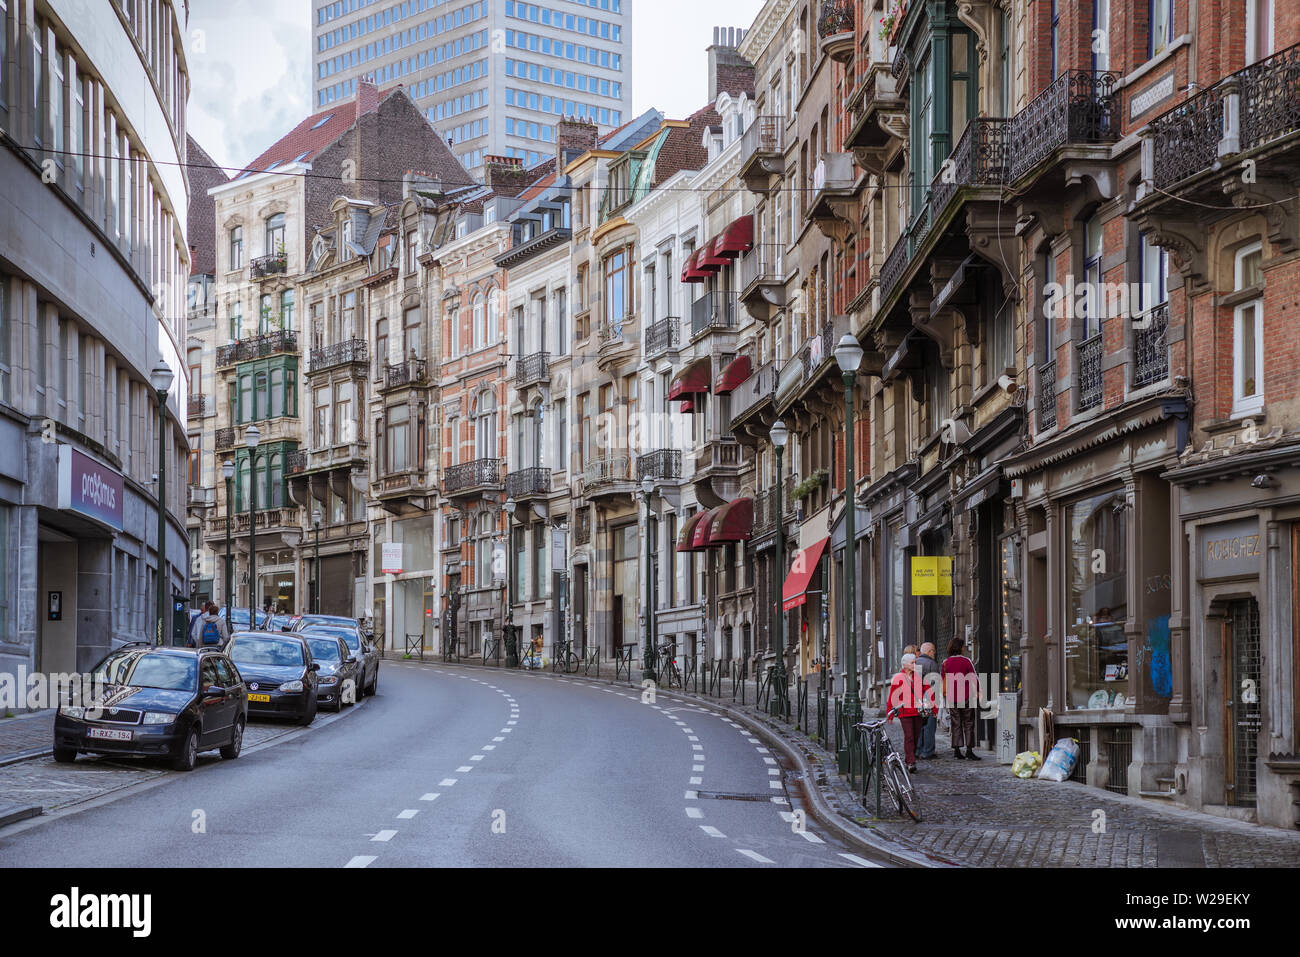 Picturesque historic townhouses in central Brussels, Belgium Stock Photo